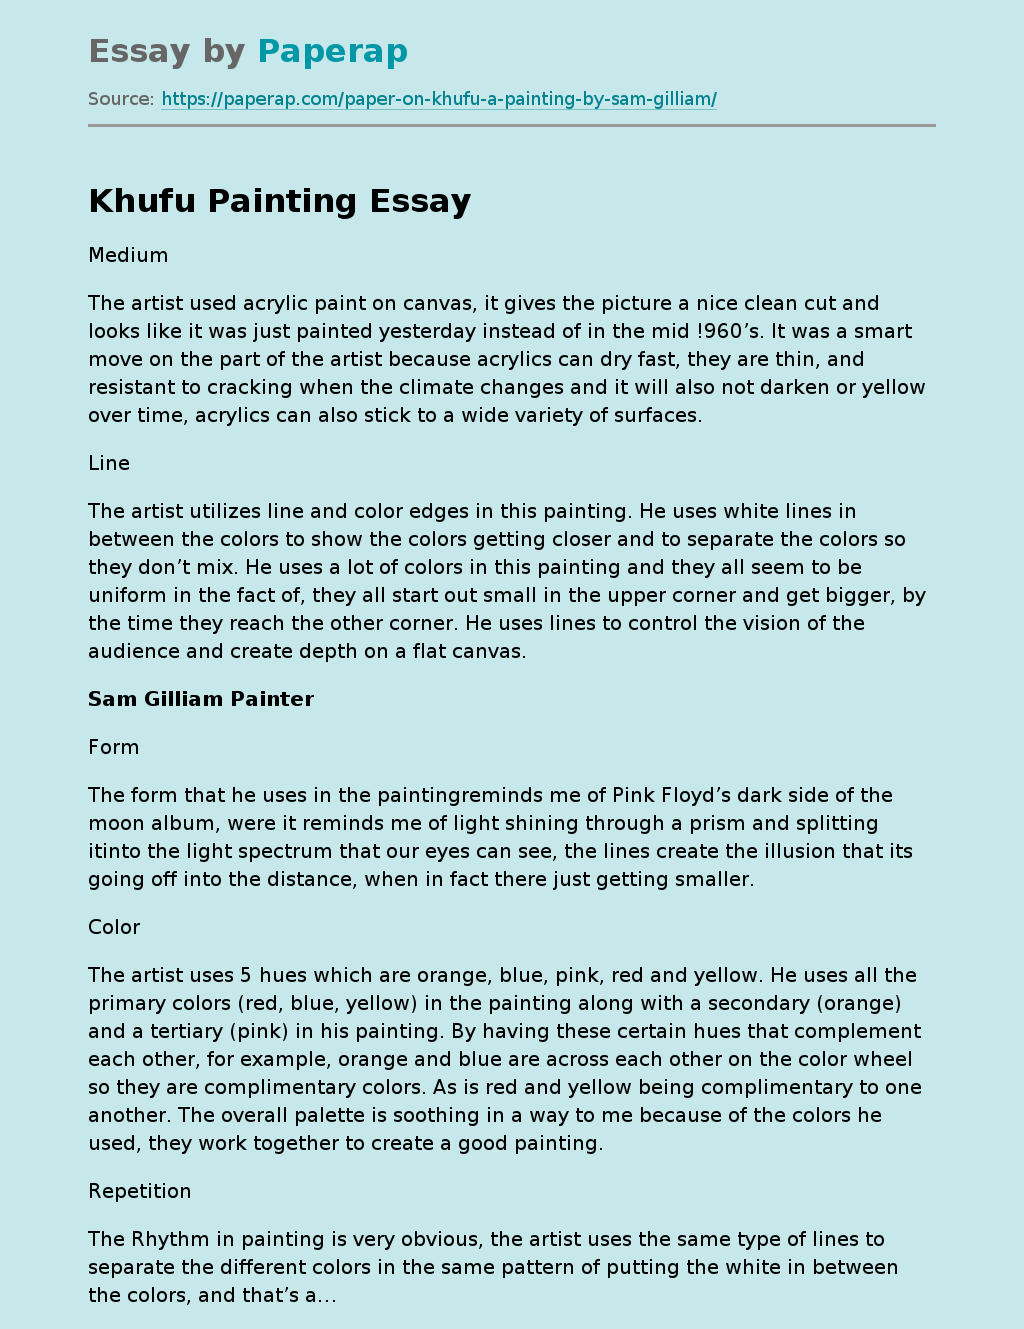 Khufu Painting: Tools and Meaning